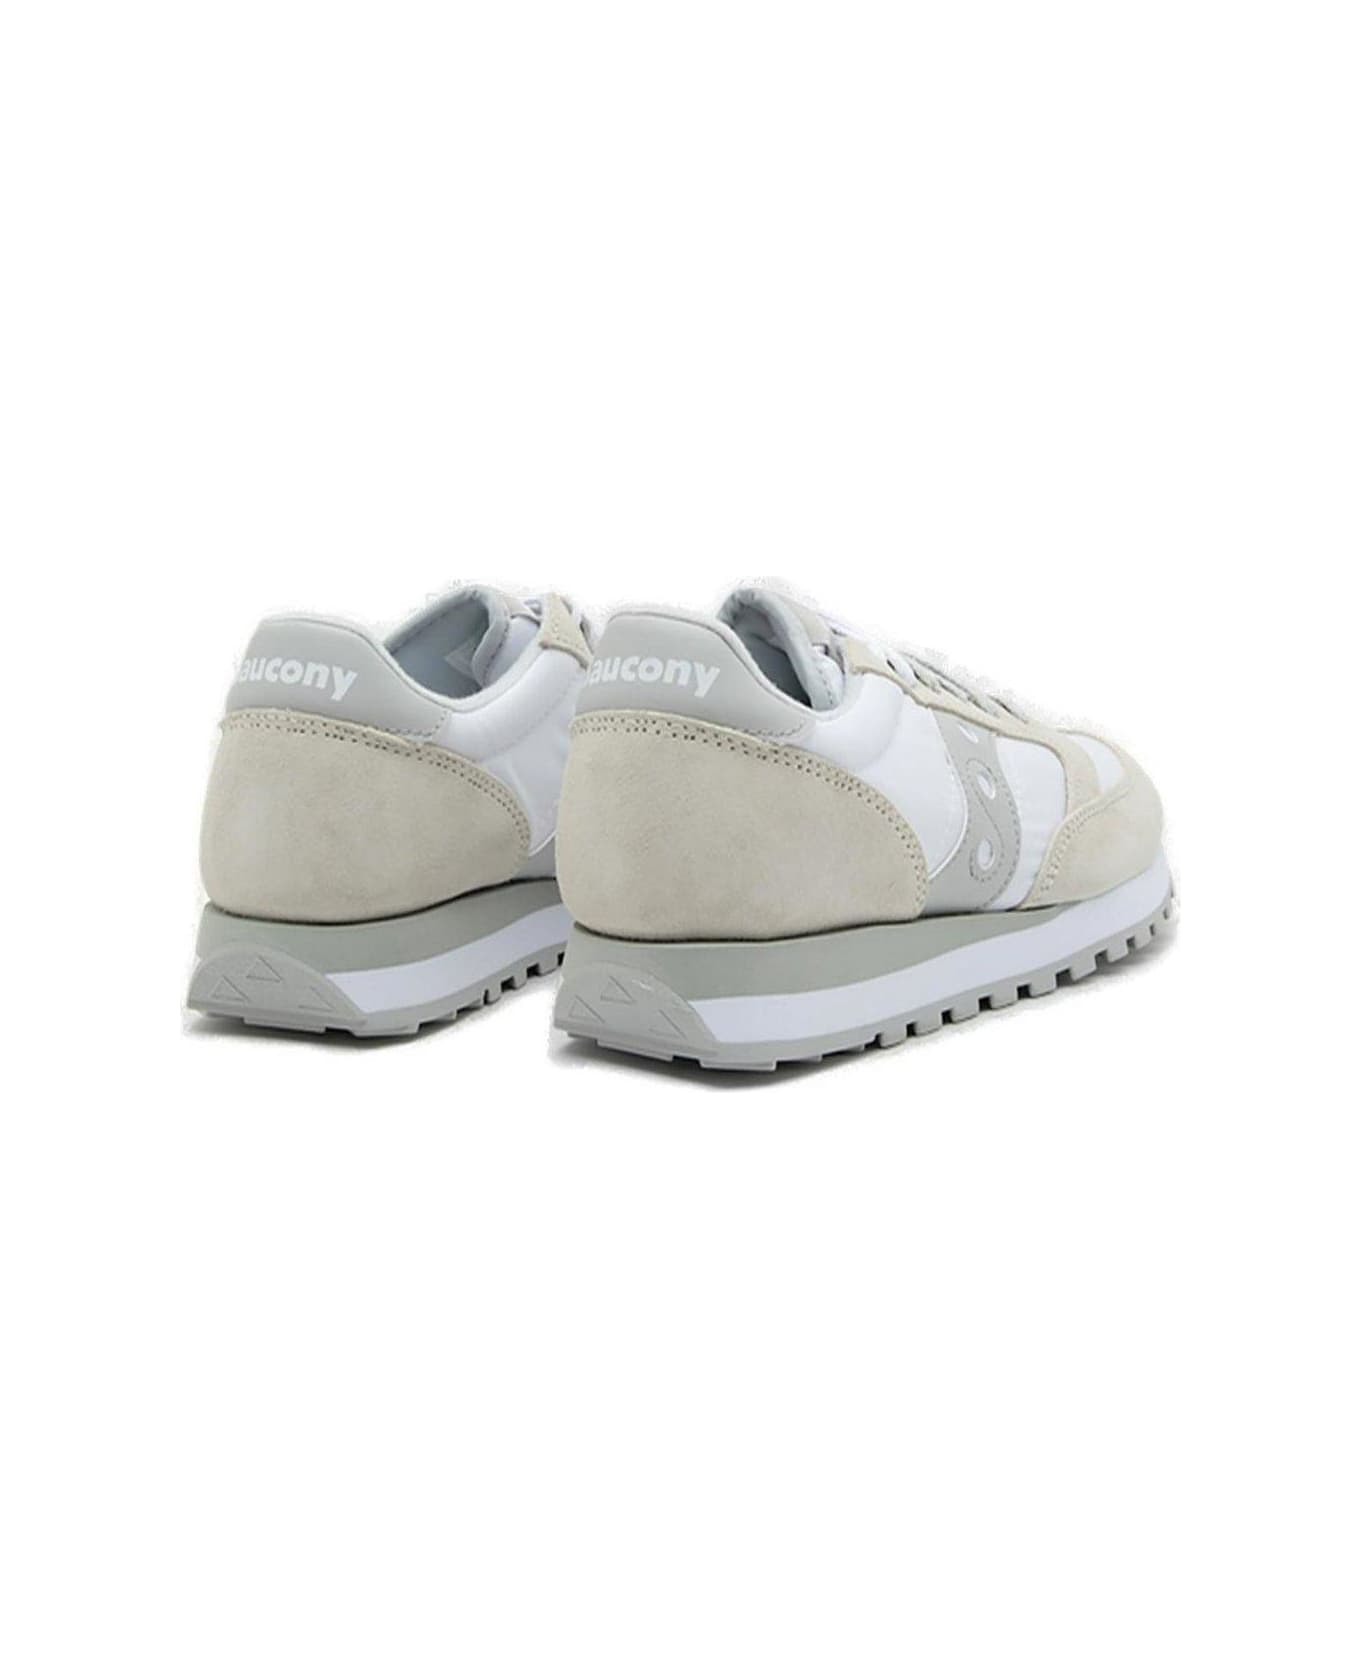 Saucony Jazz Original Lace-up Sneakers - White/grey スニーカー